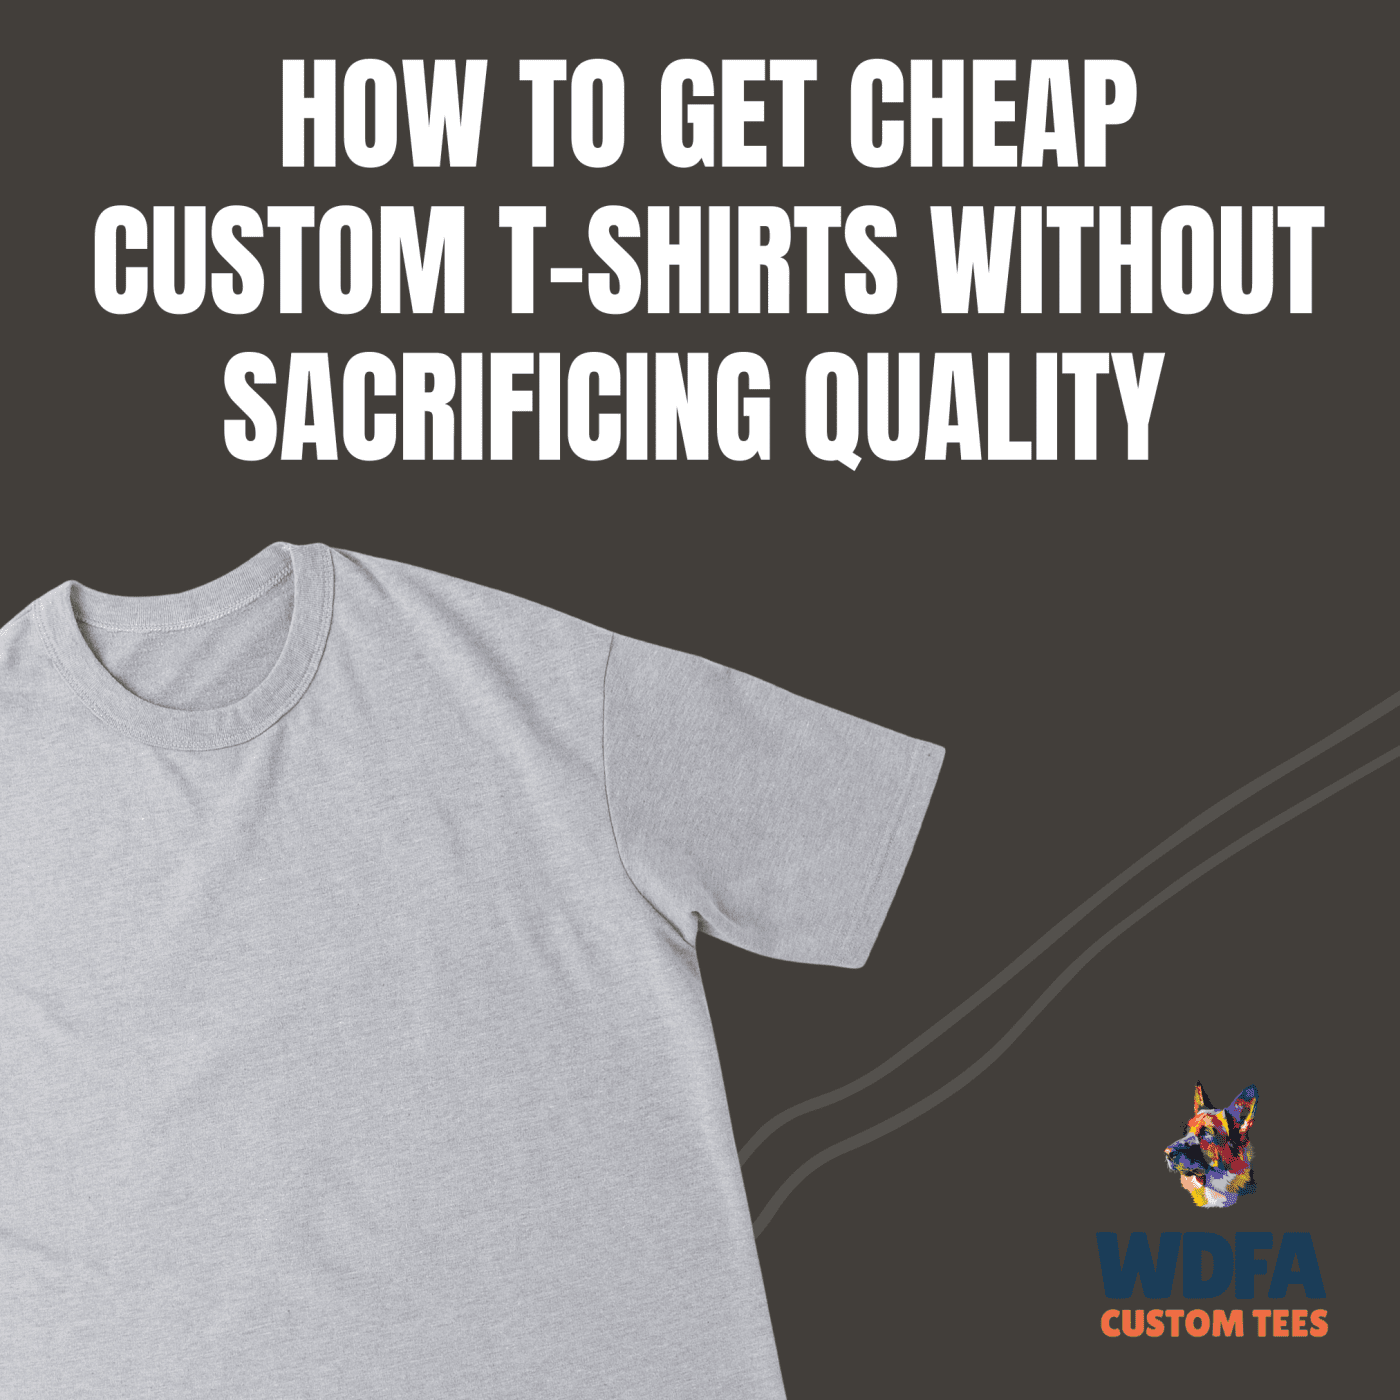 How to Get Cheap Custom T-Shirts Without Sacrificing Quality (Cheap Custom T-Shirts)- custom t shirts, t-shirt printing, tshirt printing, fremont newark union city hayward san jose san francisco, personalized t-shirts